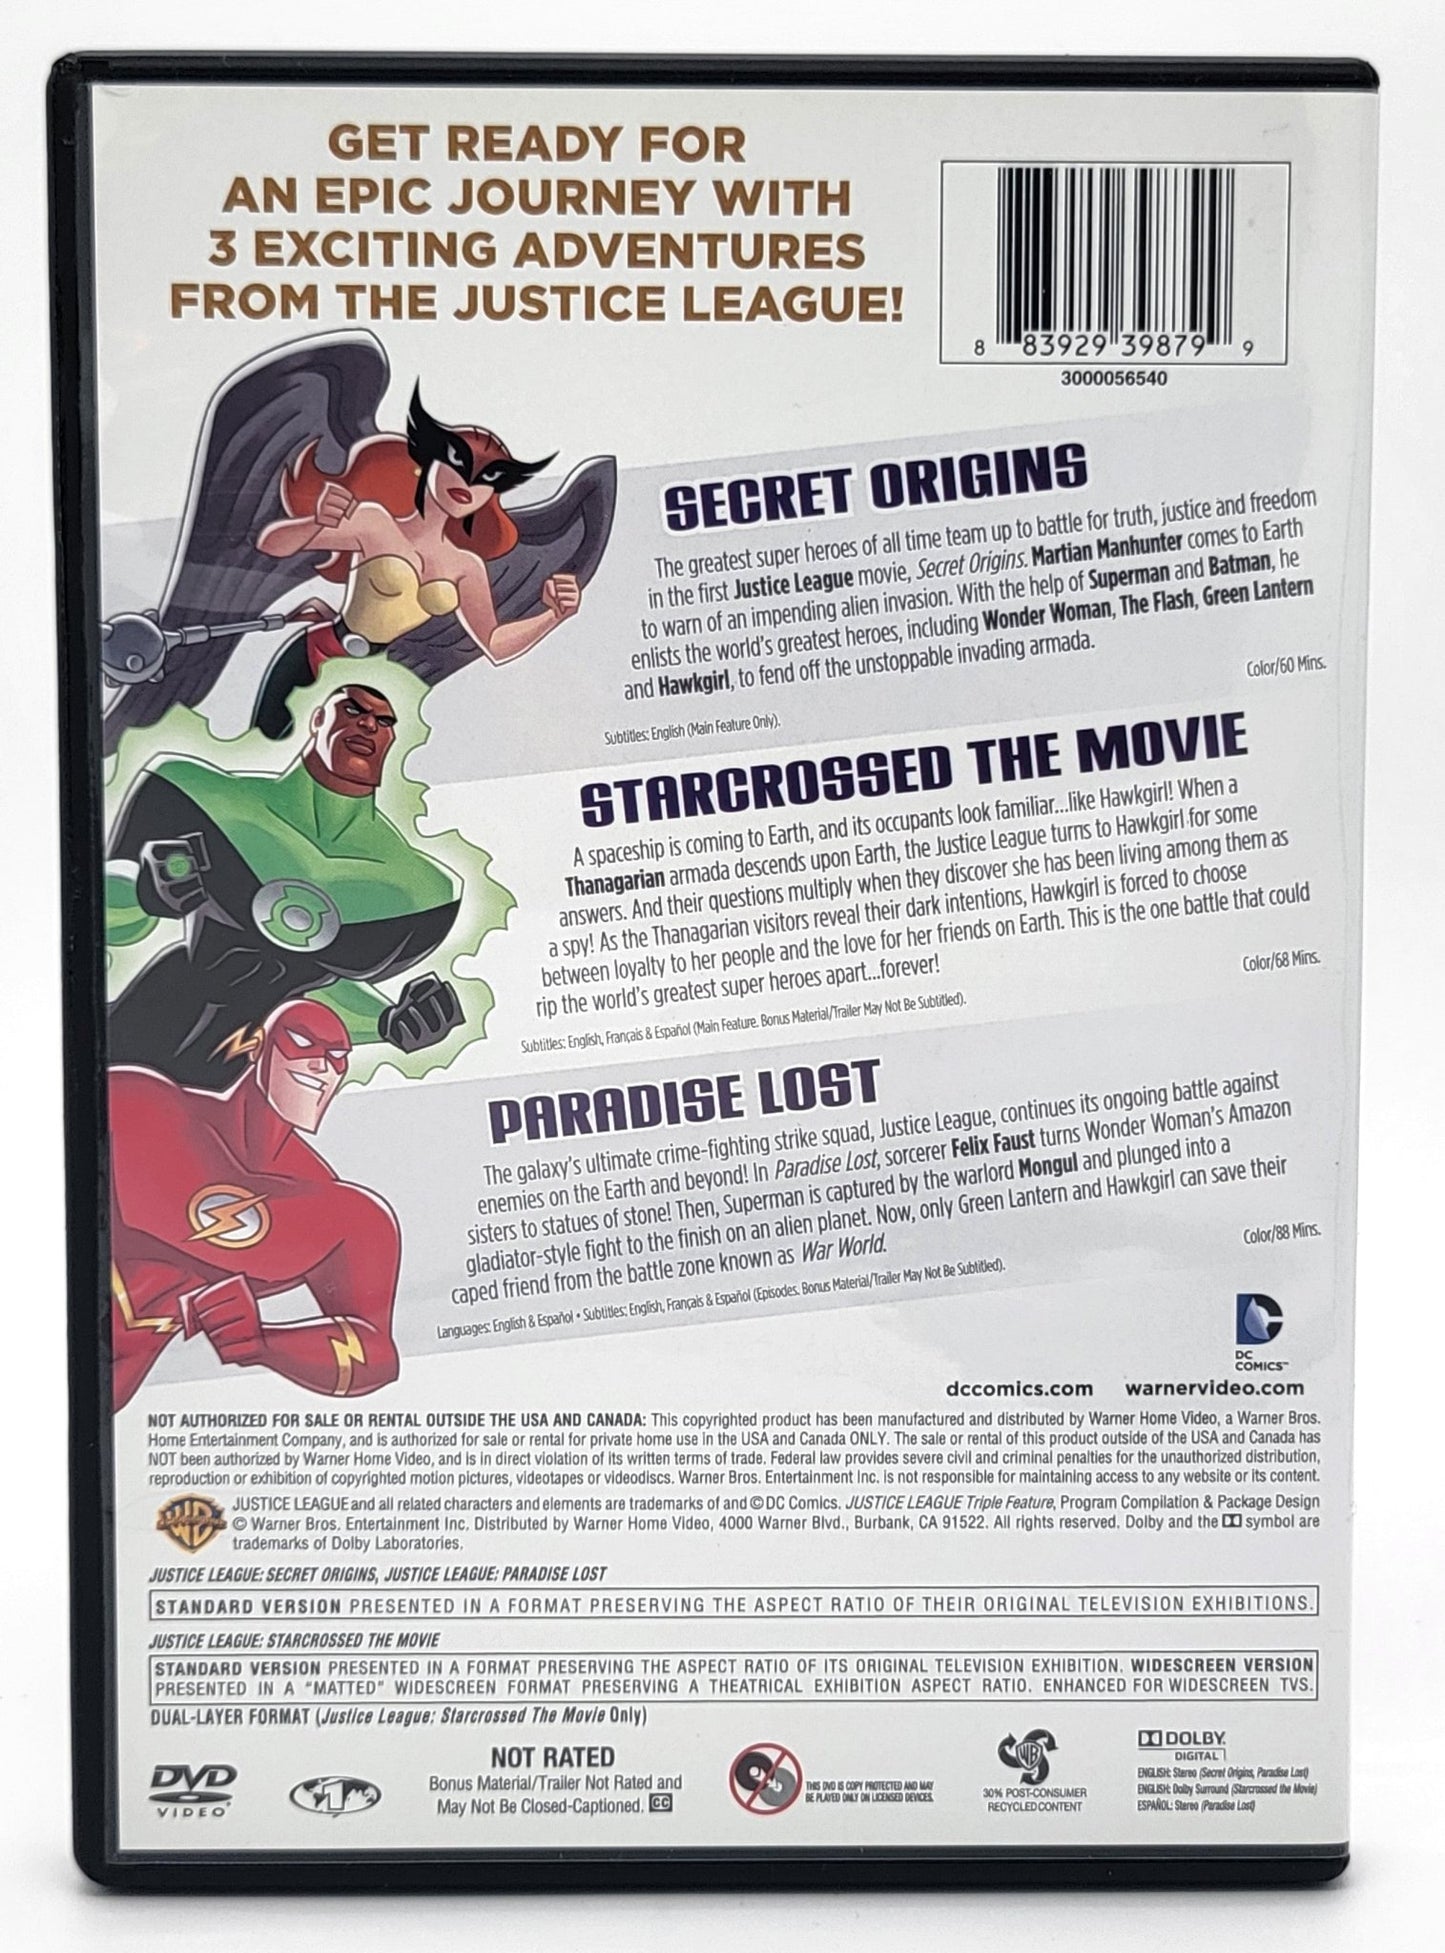 Warner Brother Family Entertainment - Justice League - Triple Feature | DVD | 3 Disc Set - DVD - Steady Bunny Shop